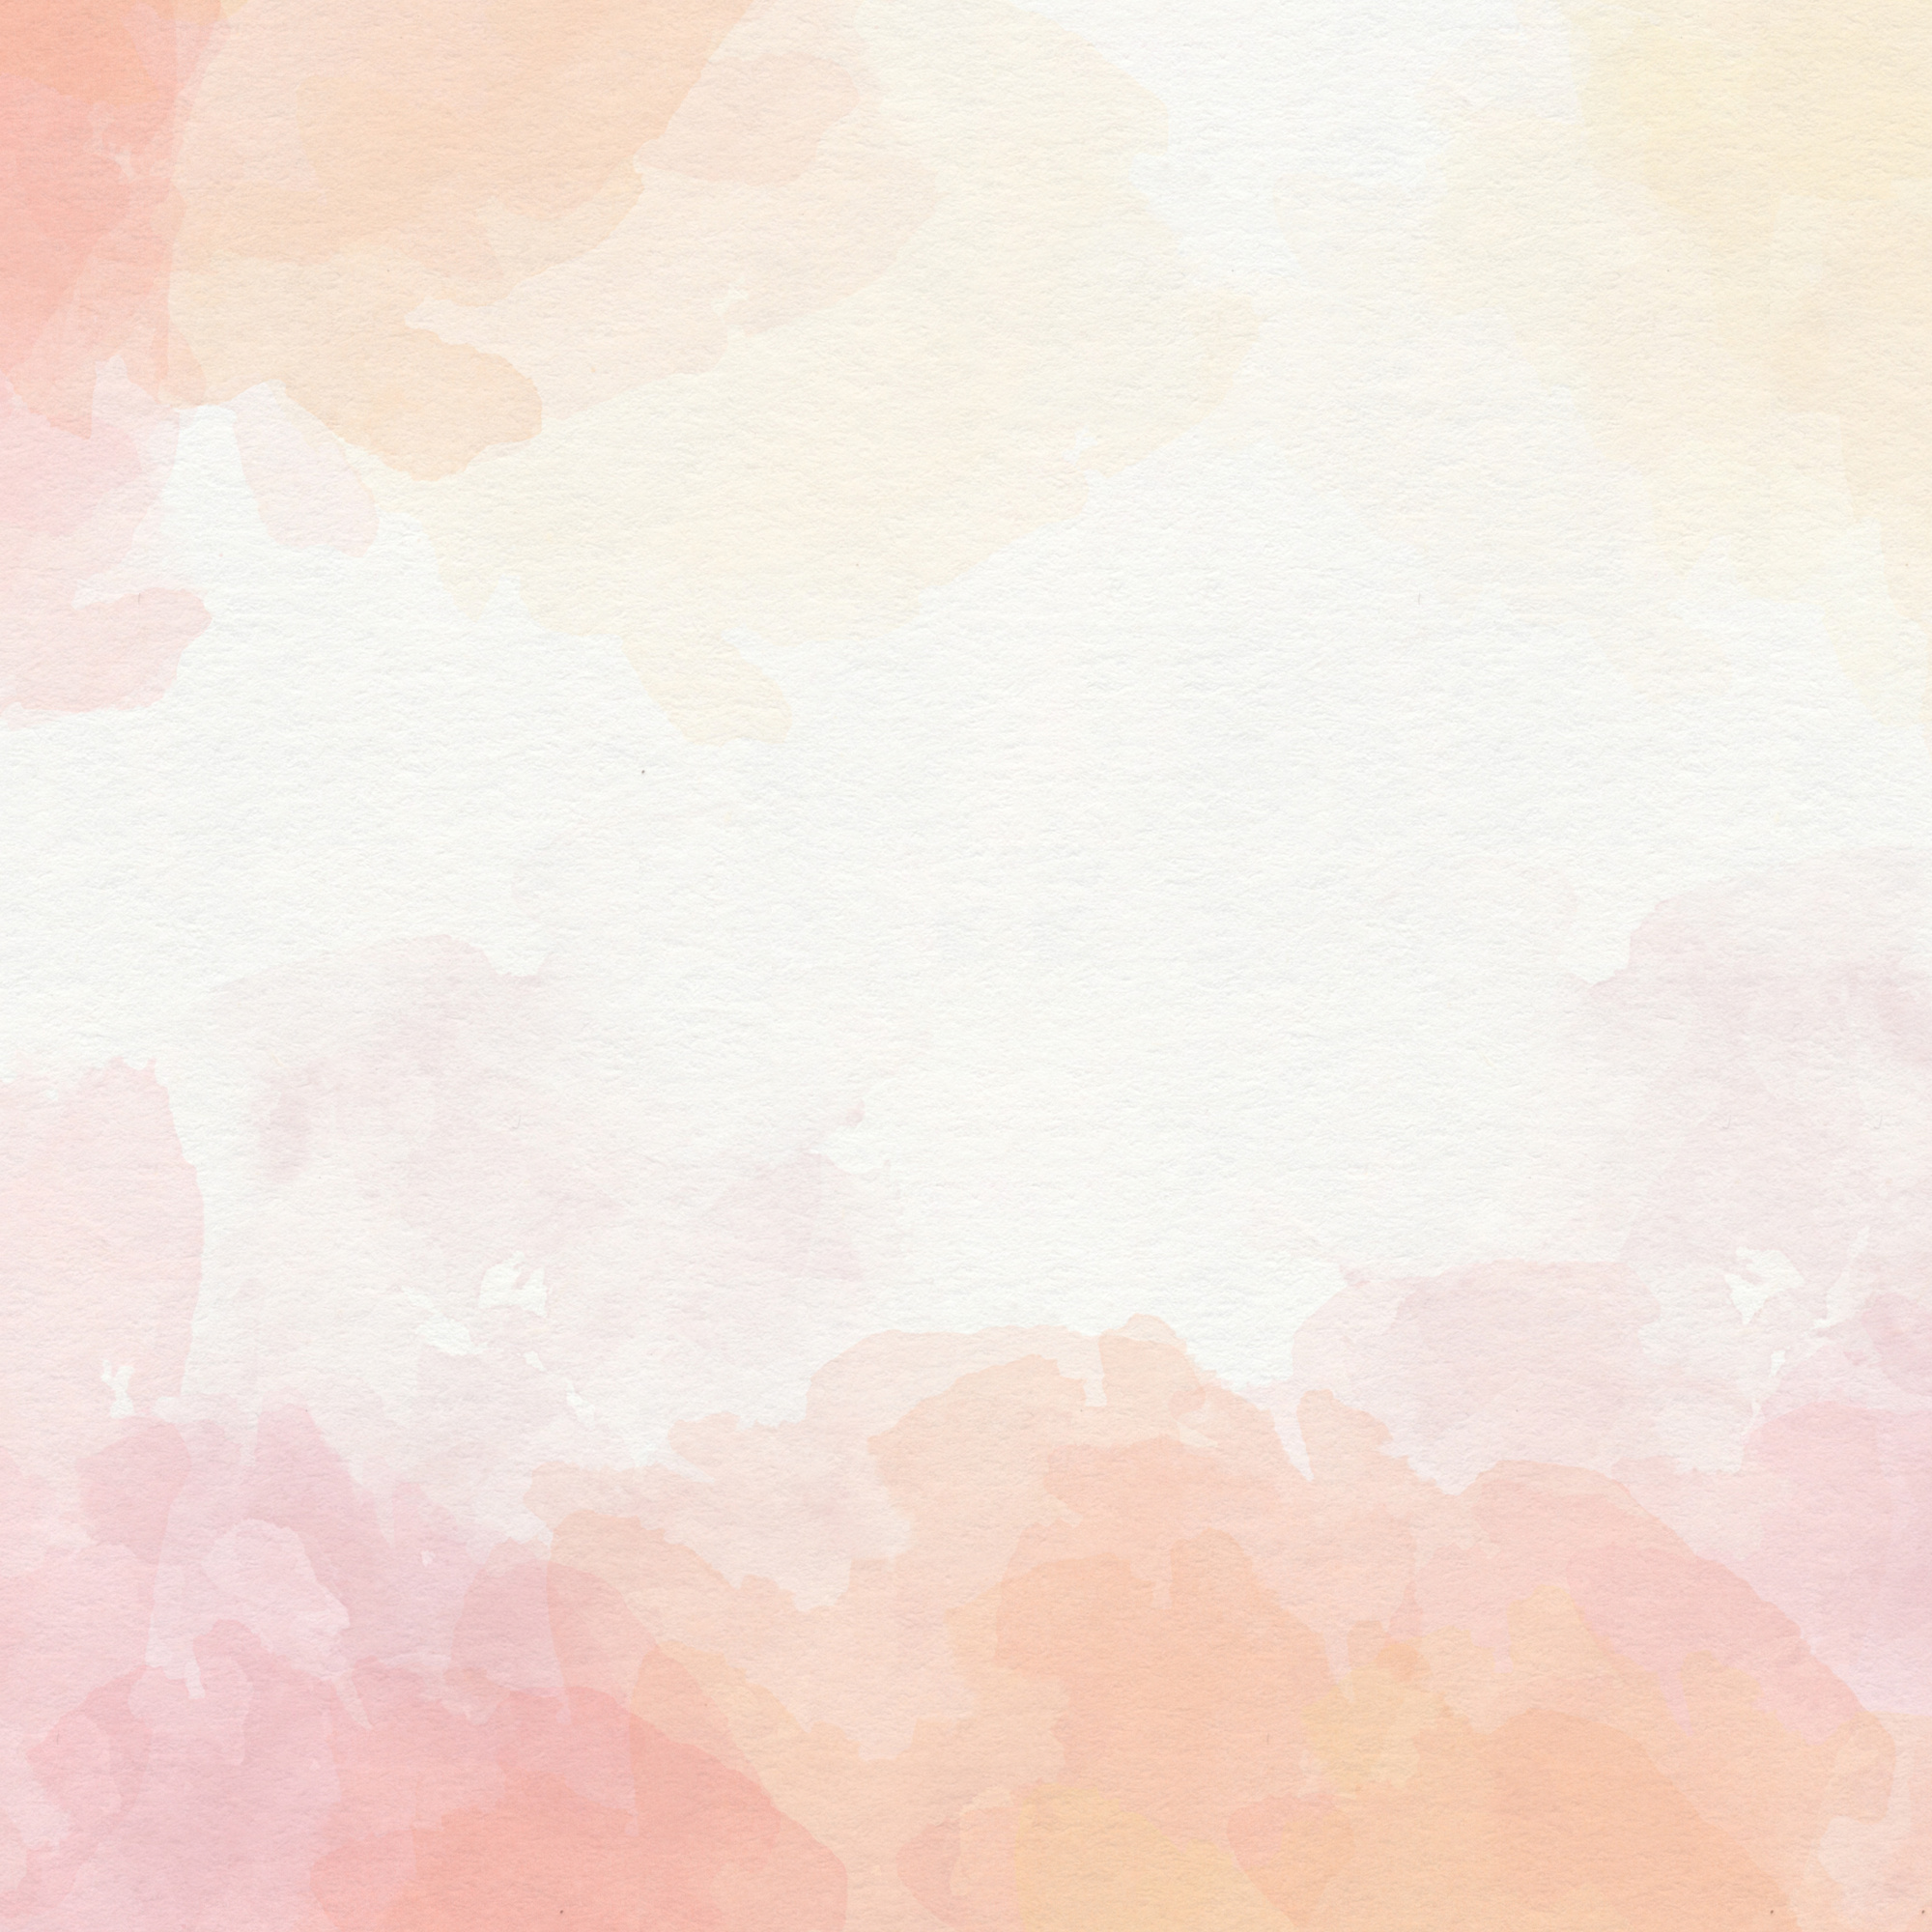 Soft Pink Watercolor Background